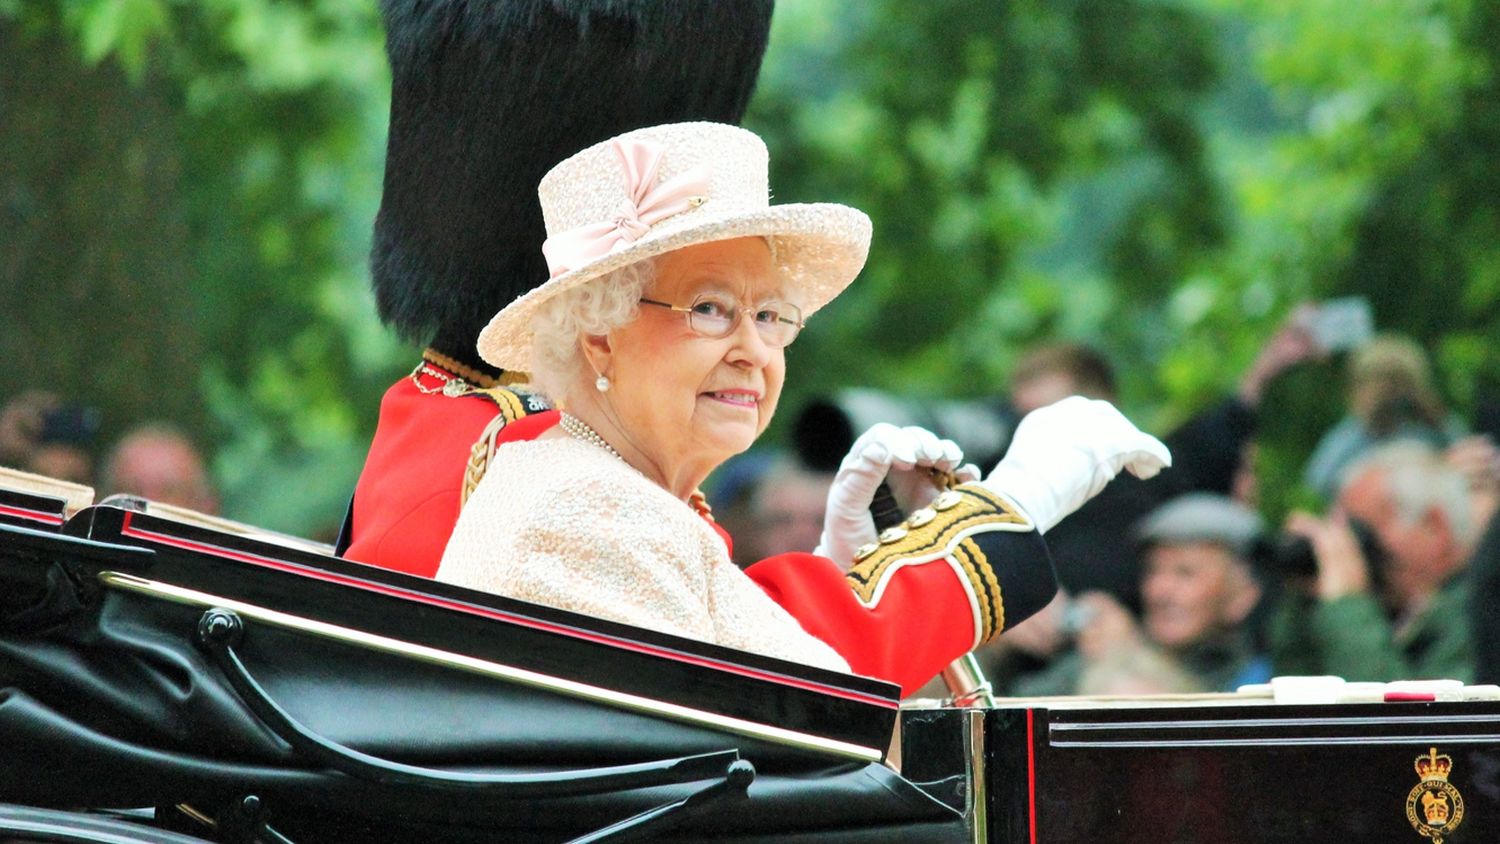 Queen Elizabeth II at the Trooping of the Colour in London (Image: Dreamstime)